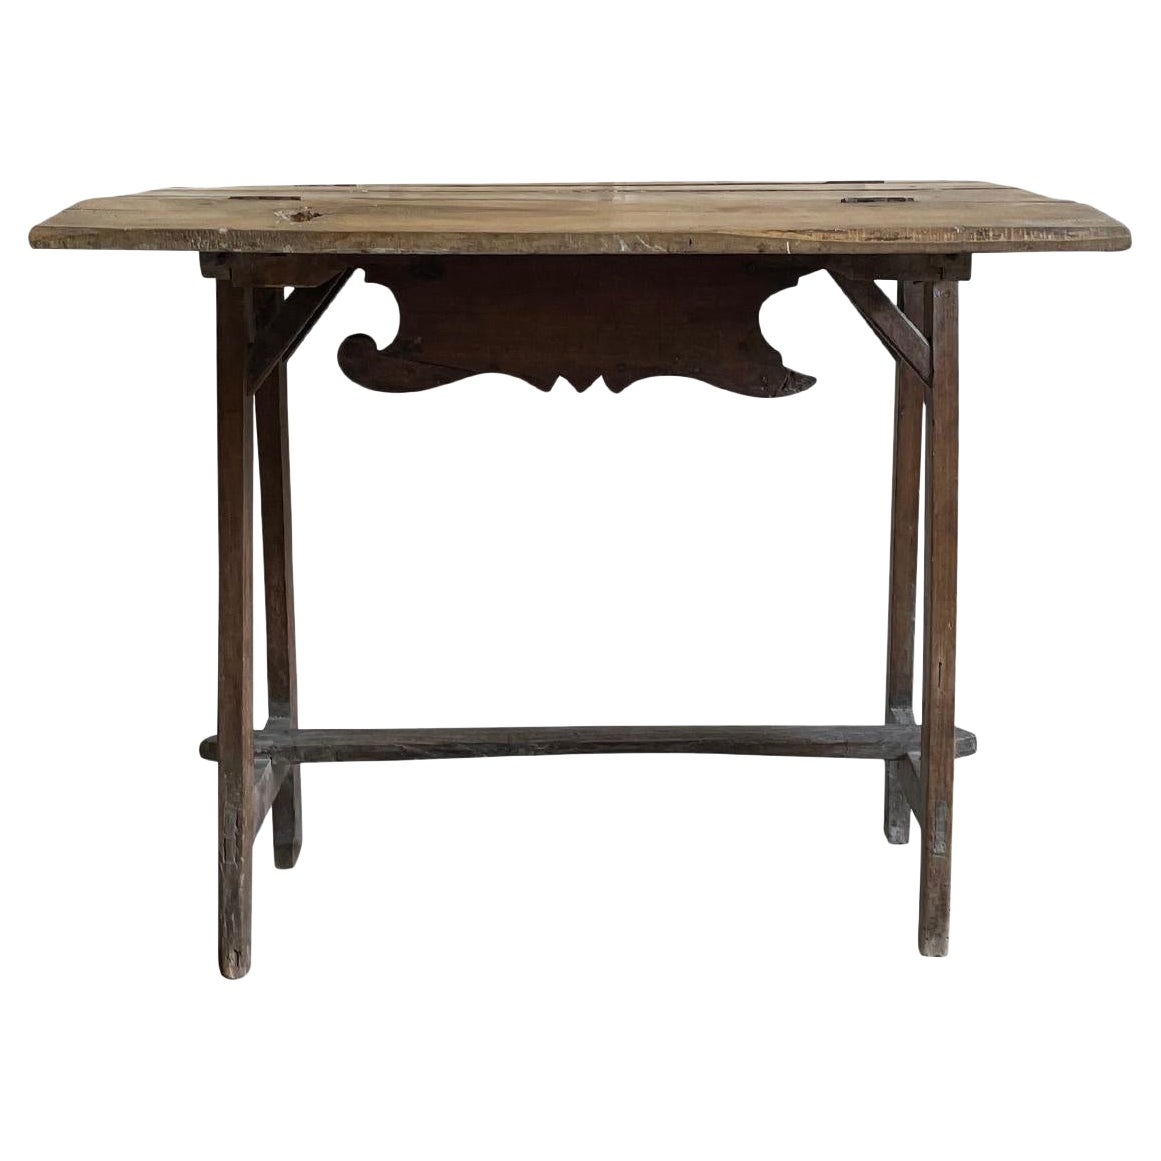 18th Century Italian Small Foldable Walnut Side Table - Antique Tuscan Table